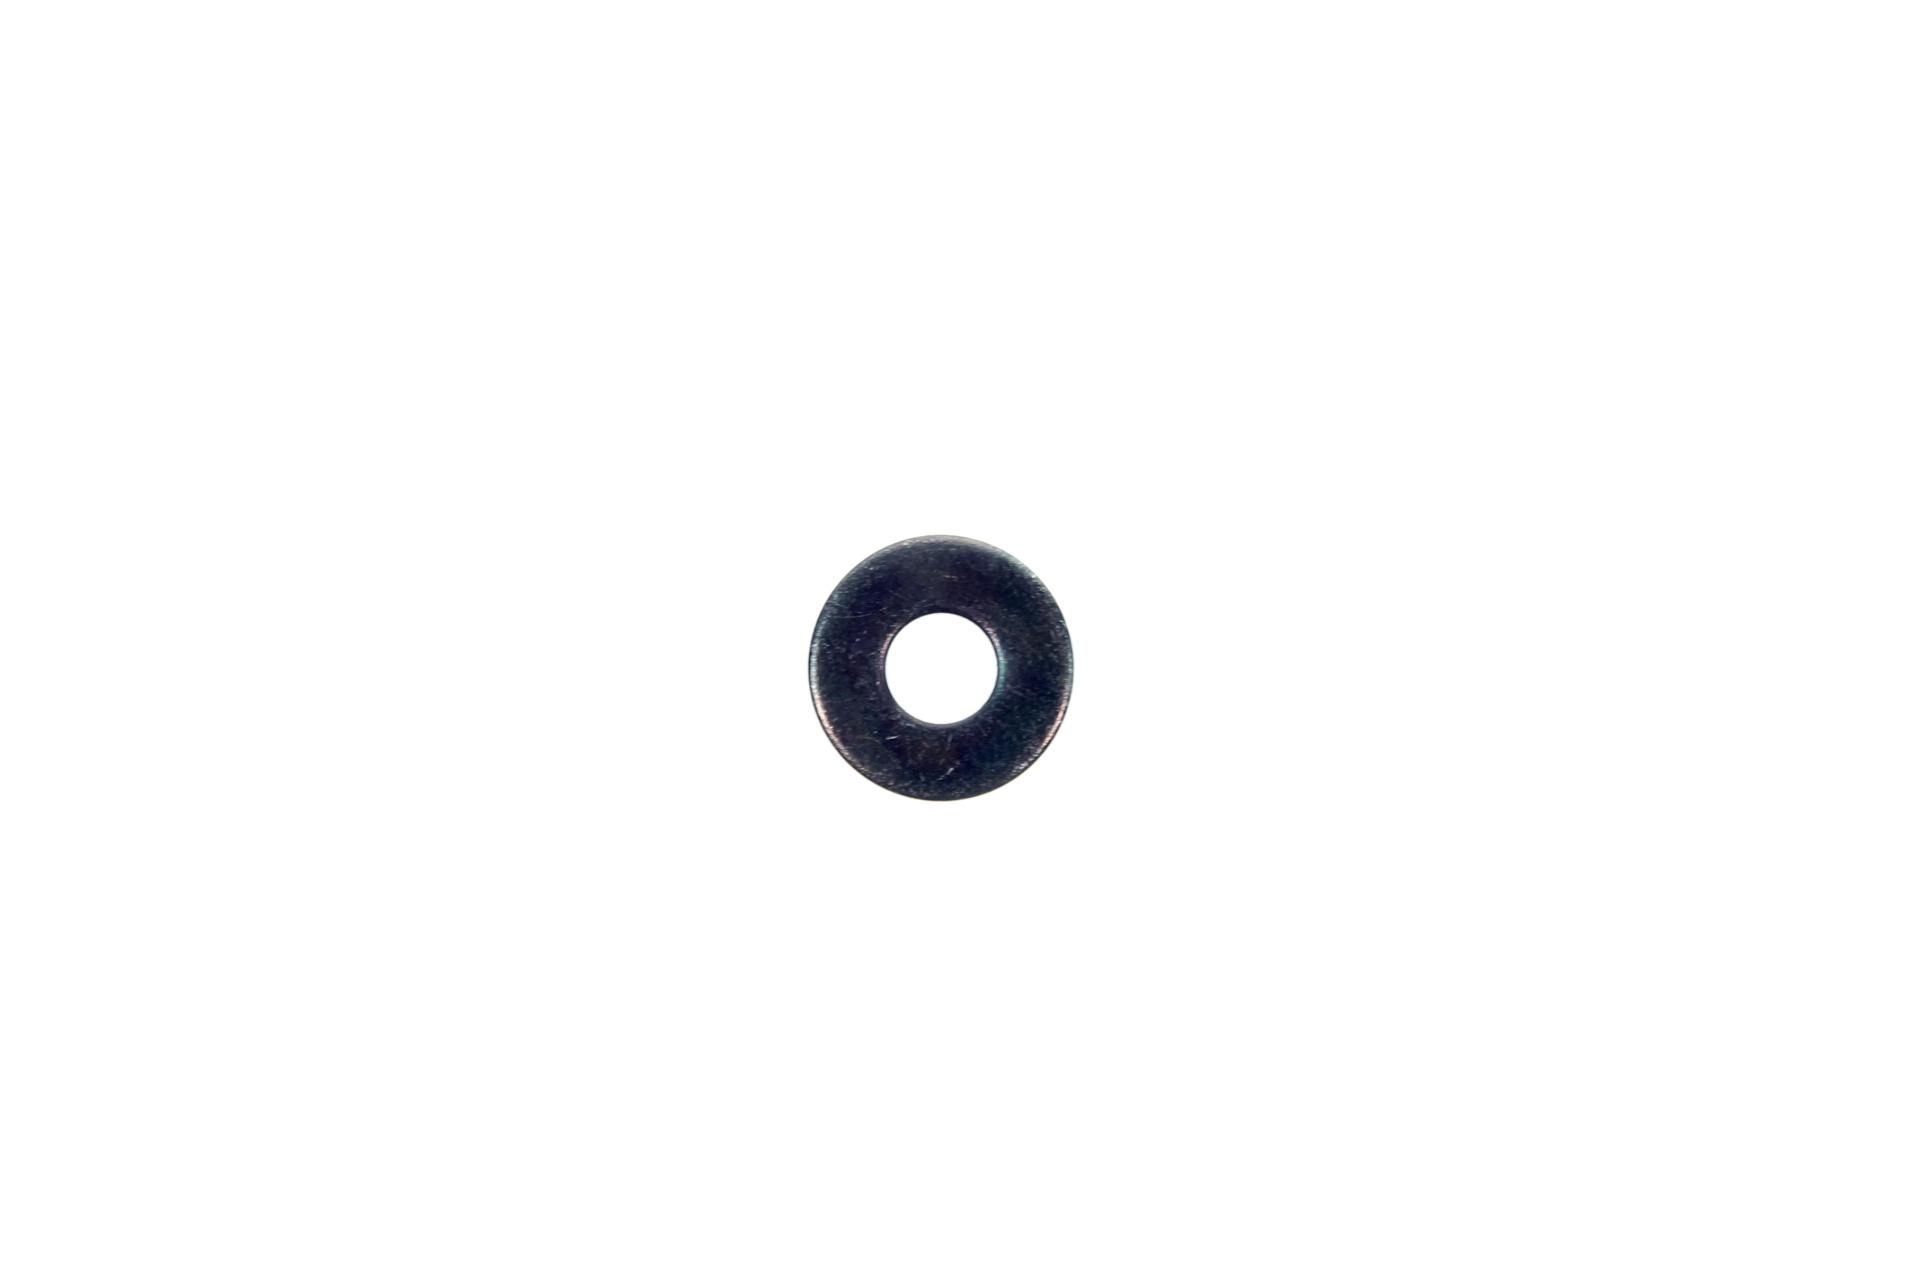 3ES-84327-00-00 Superseded by 90201-05029-00 - WASHER,PLATE